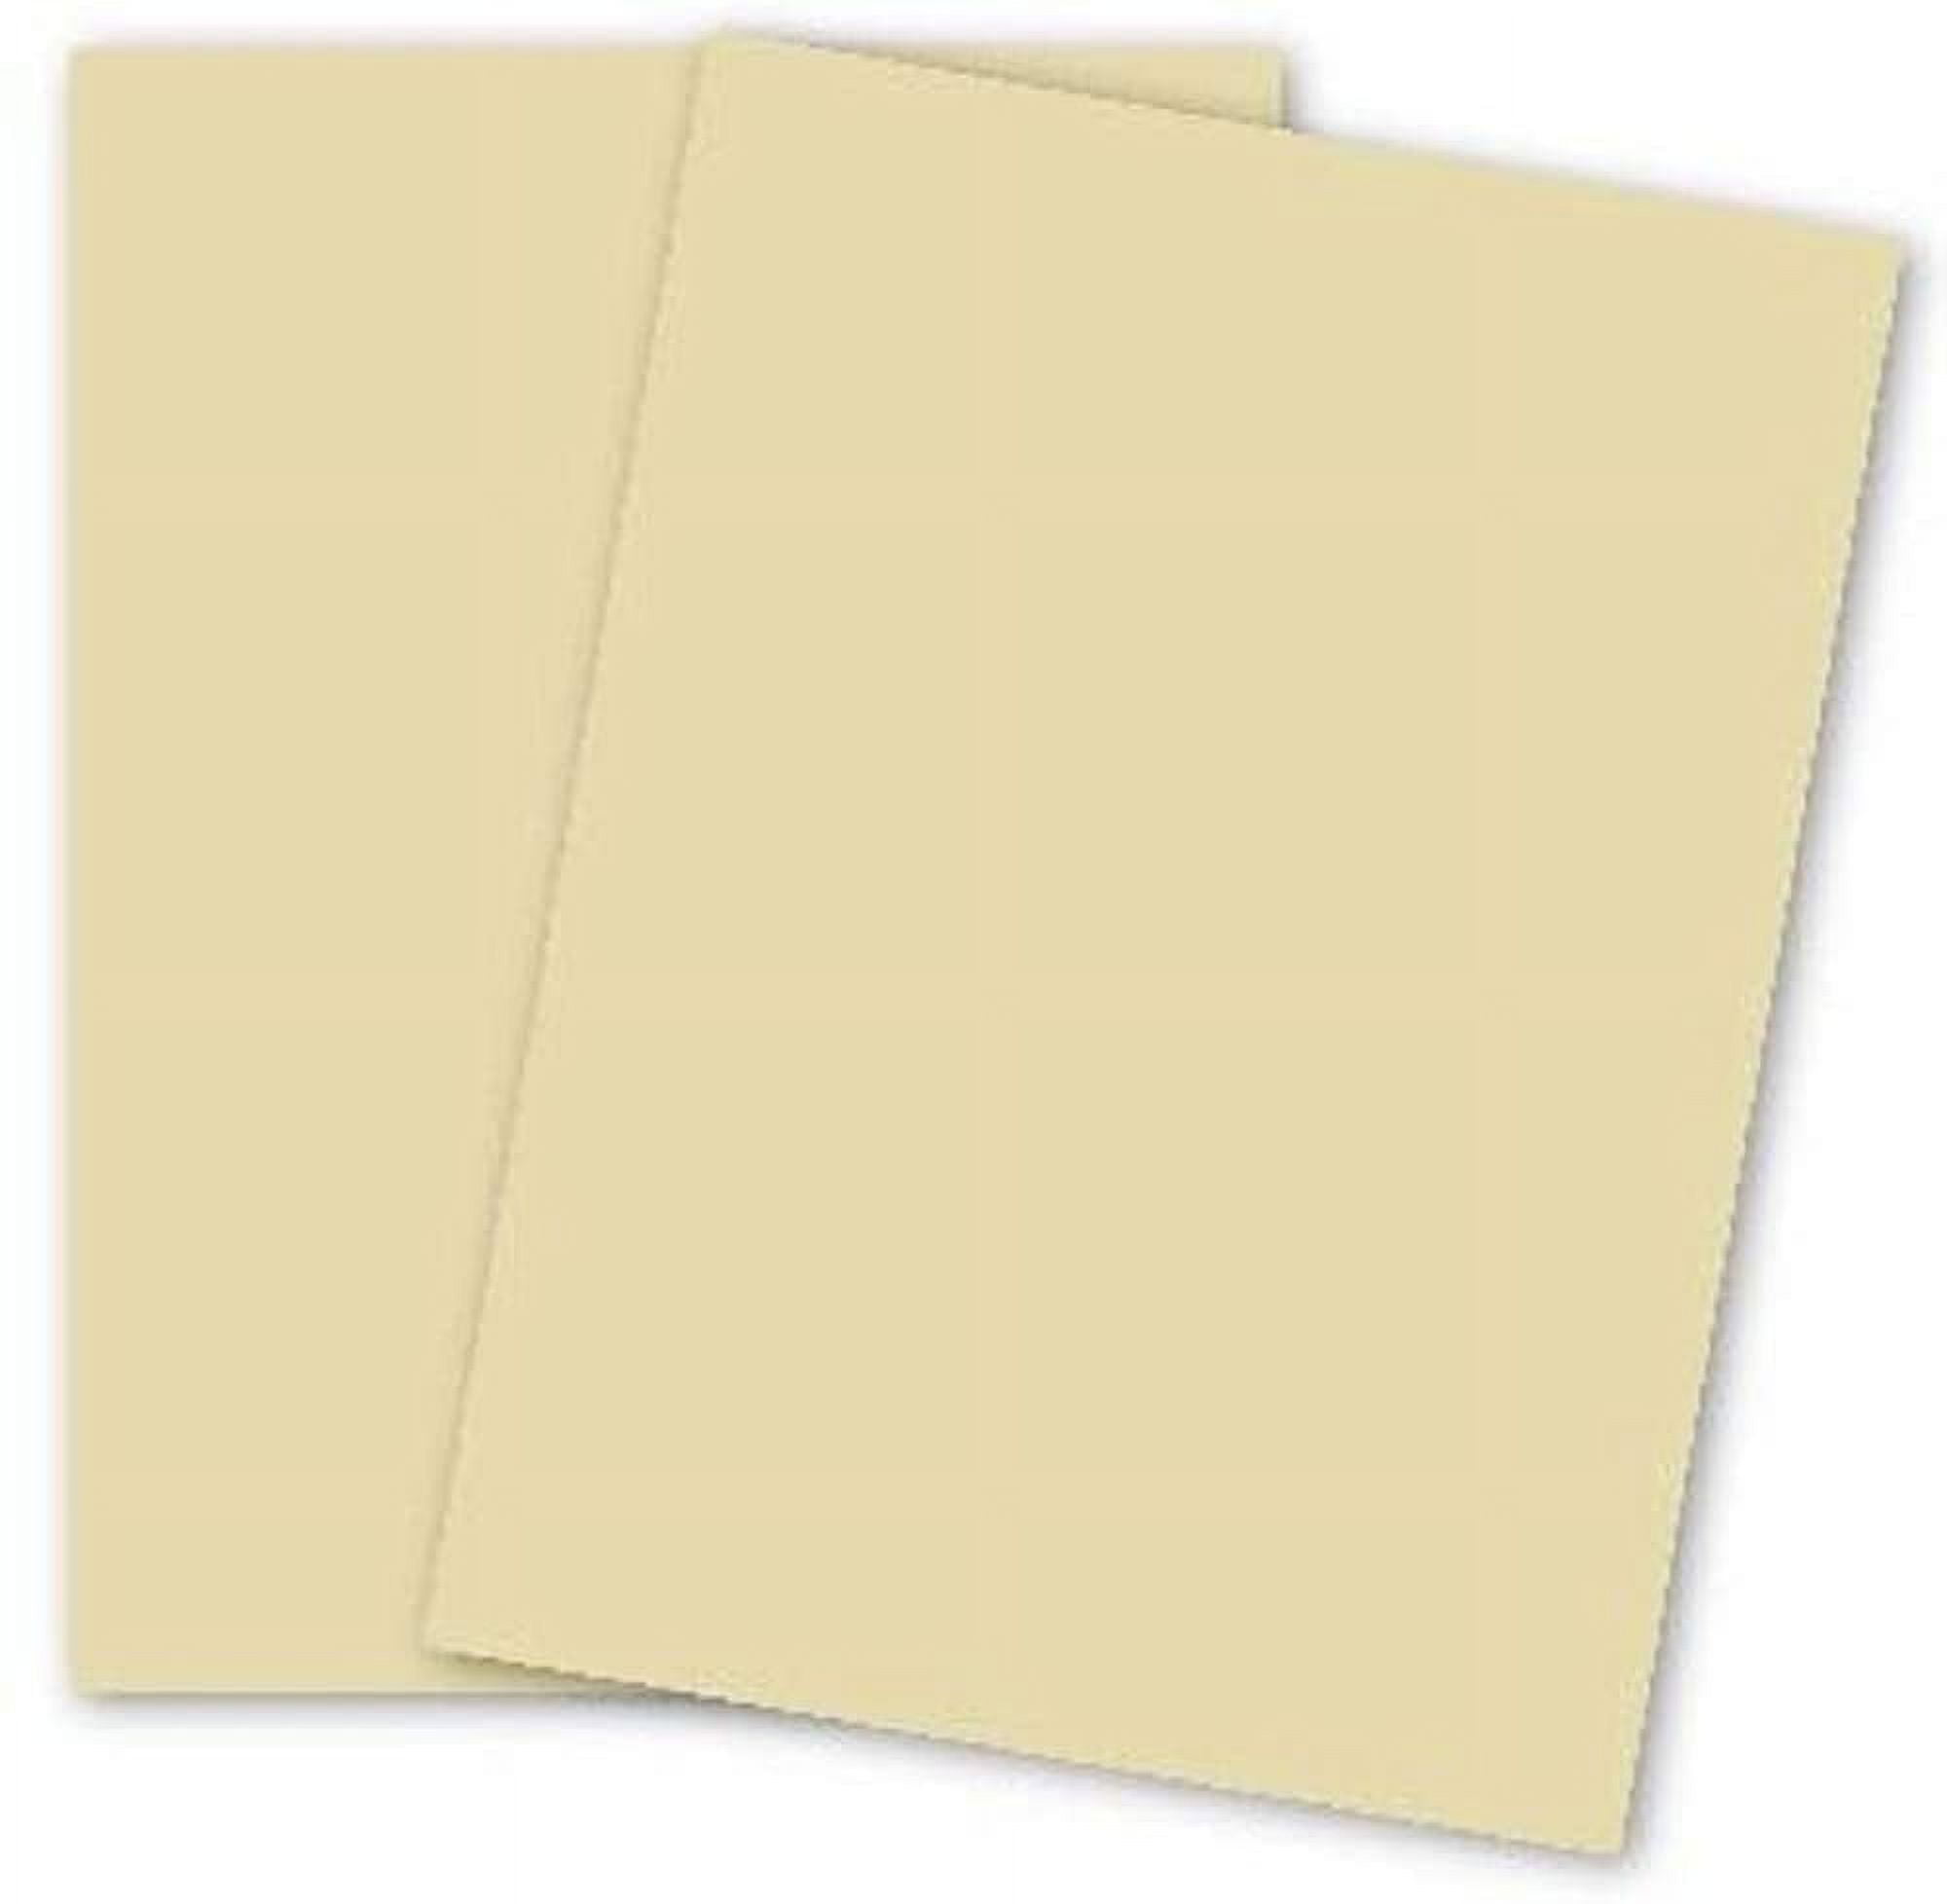 Ivory Metallic Paper - 96-Pack Shimmer Papers, Double Sided, Laser Printer  Compatible, Perfect for Weddings, Baby Showers, Birthdays, Craft Use, 8.5 x  11 Inches